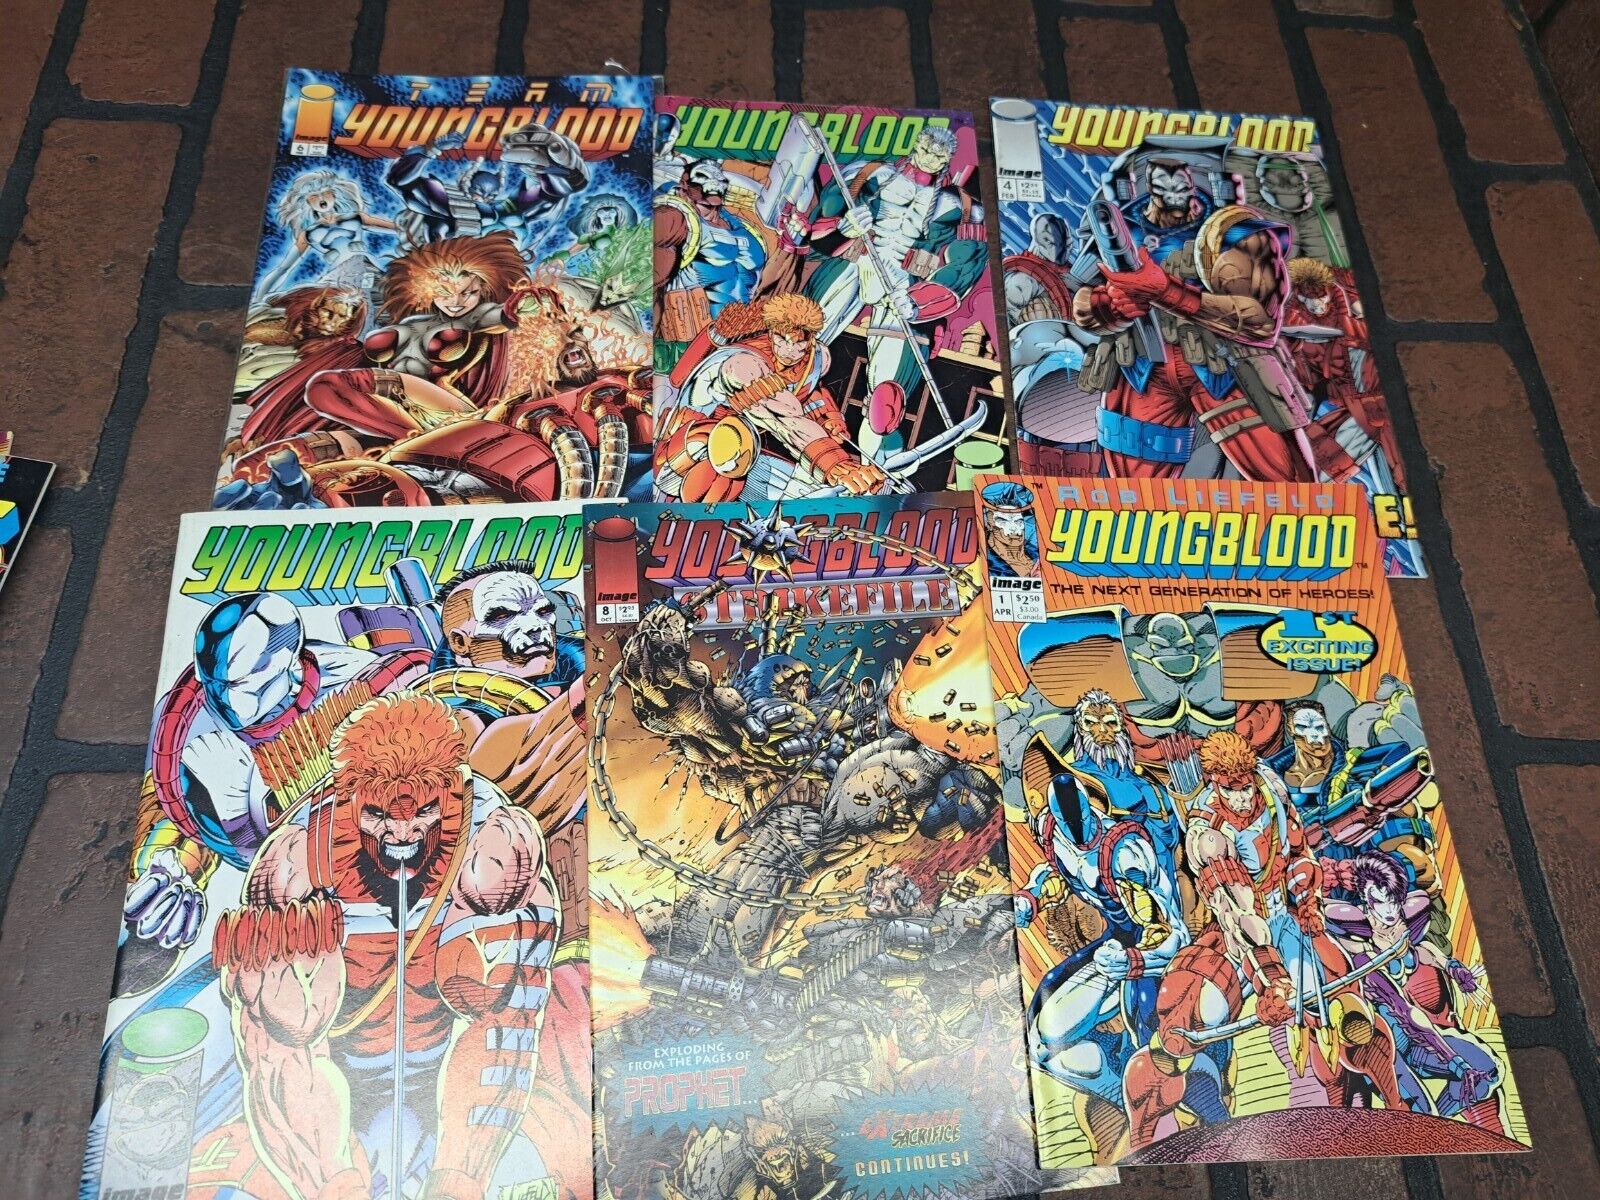 TEAM YOUNGBLOOD Mixed Lot Of 6 #0 1 3 4 6 8 (1993 Image) 